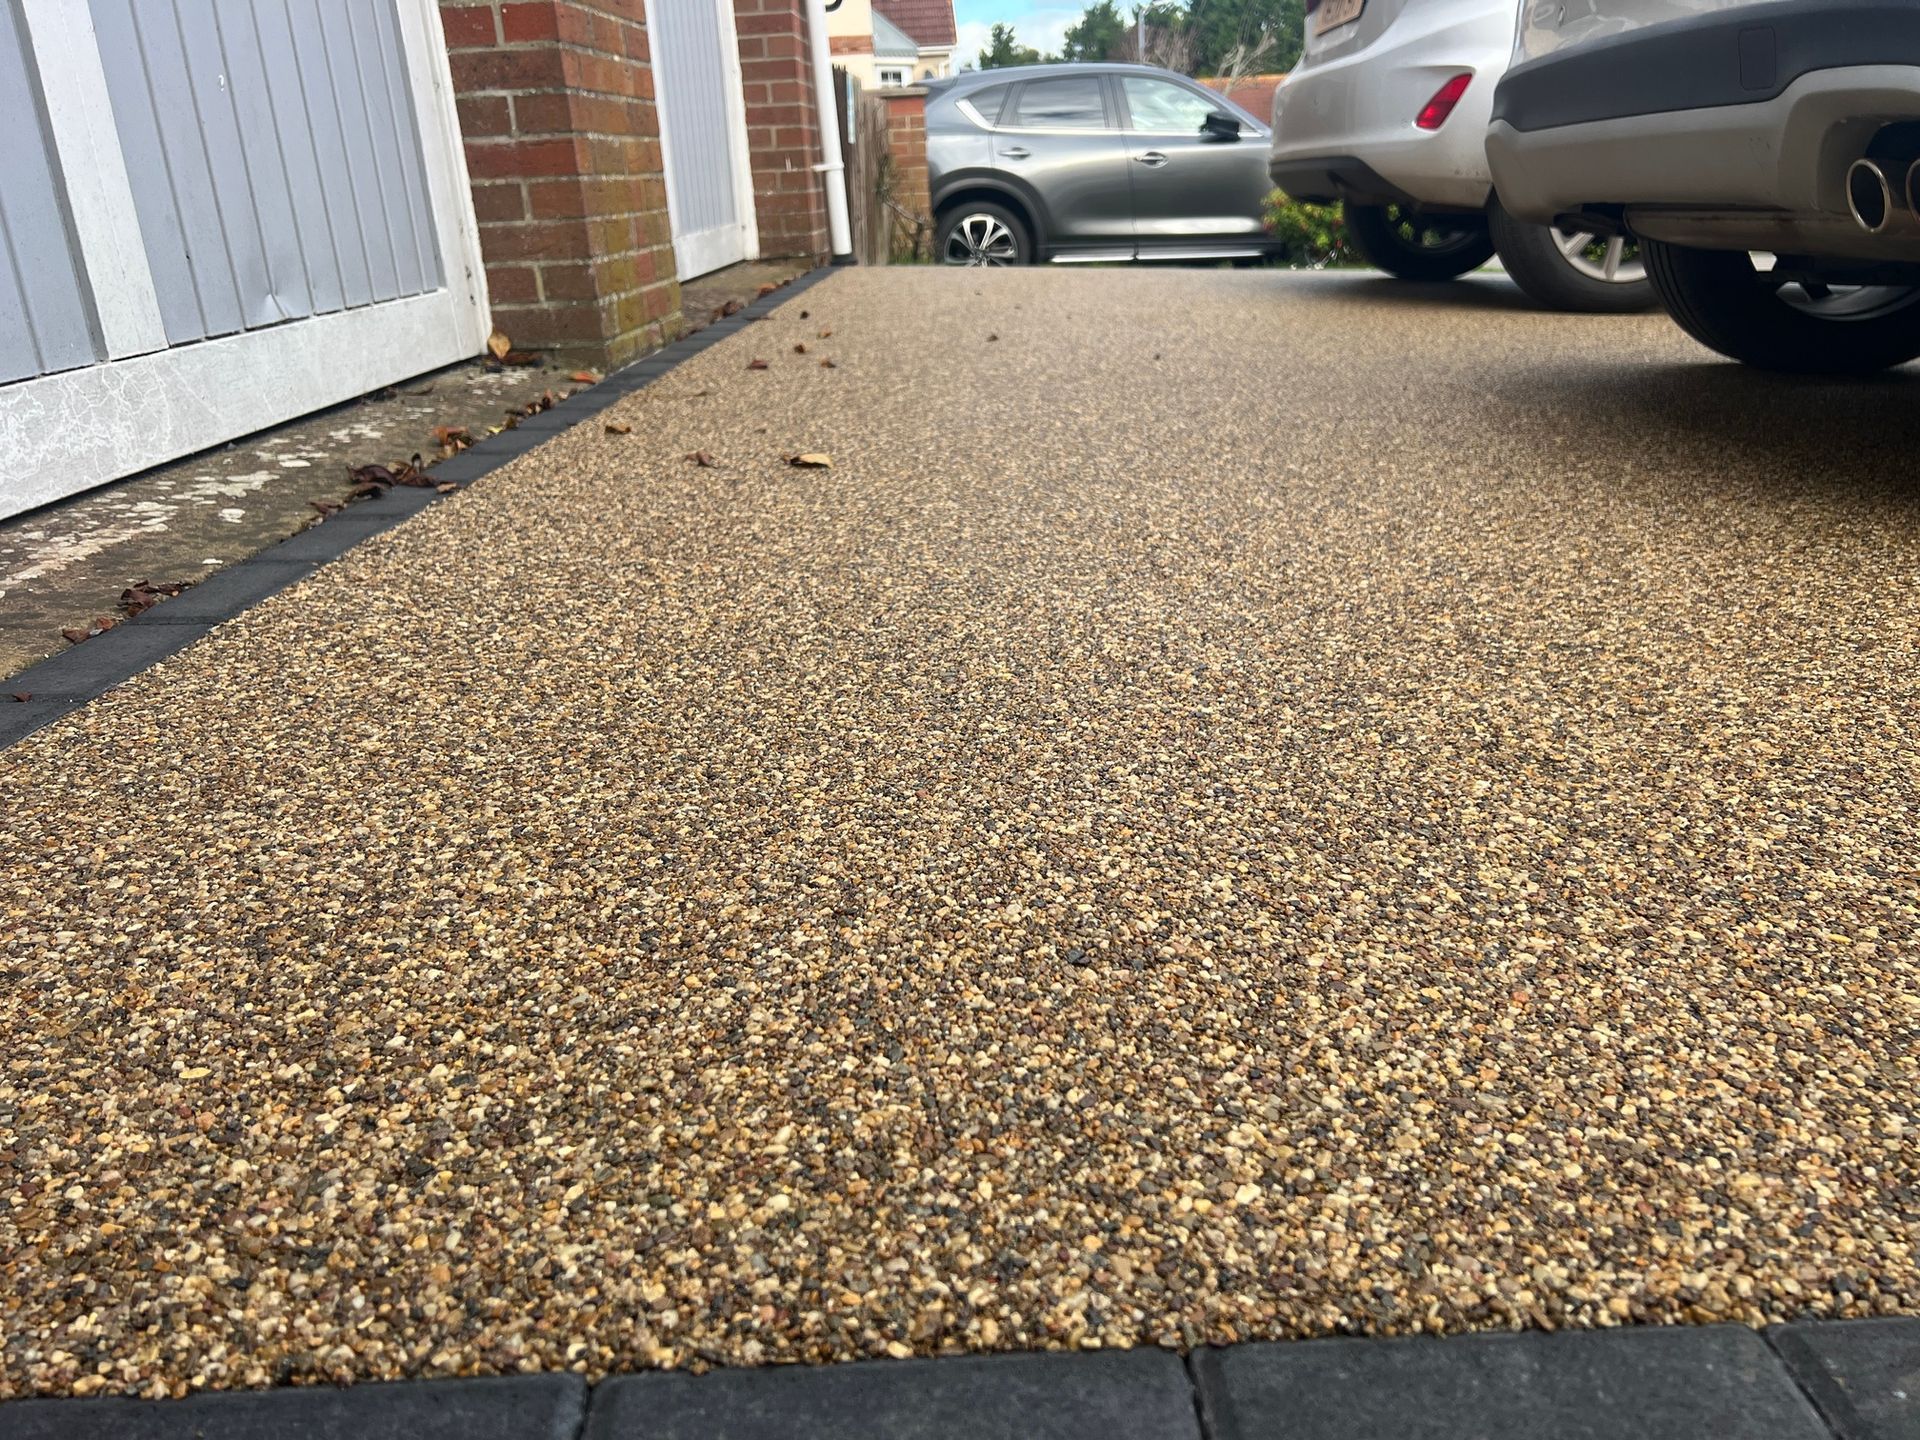 Mixed brown resin driveway with 3 cars parked on top.